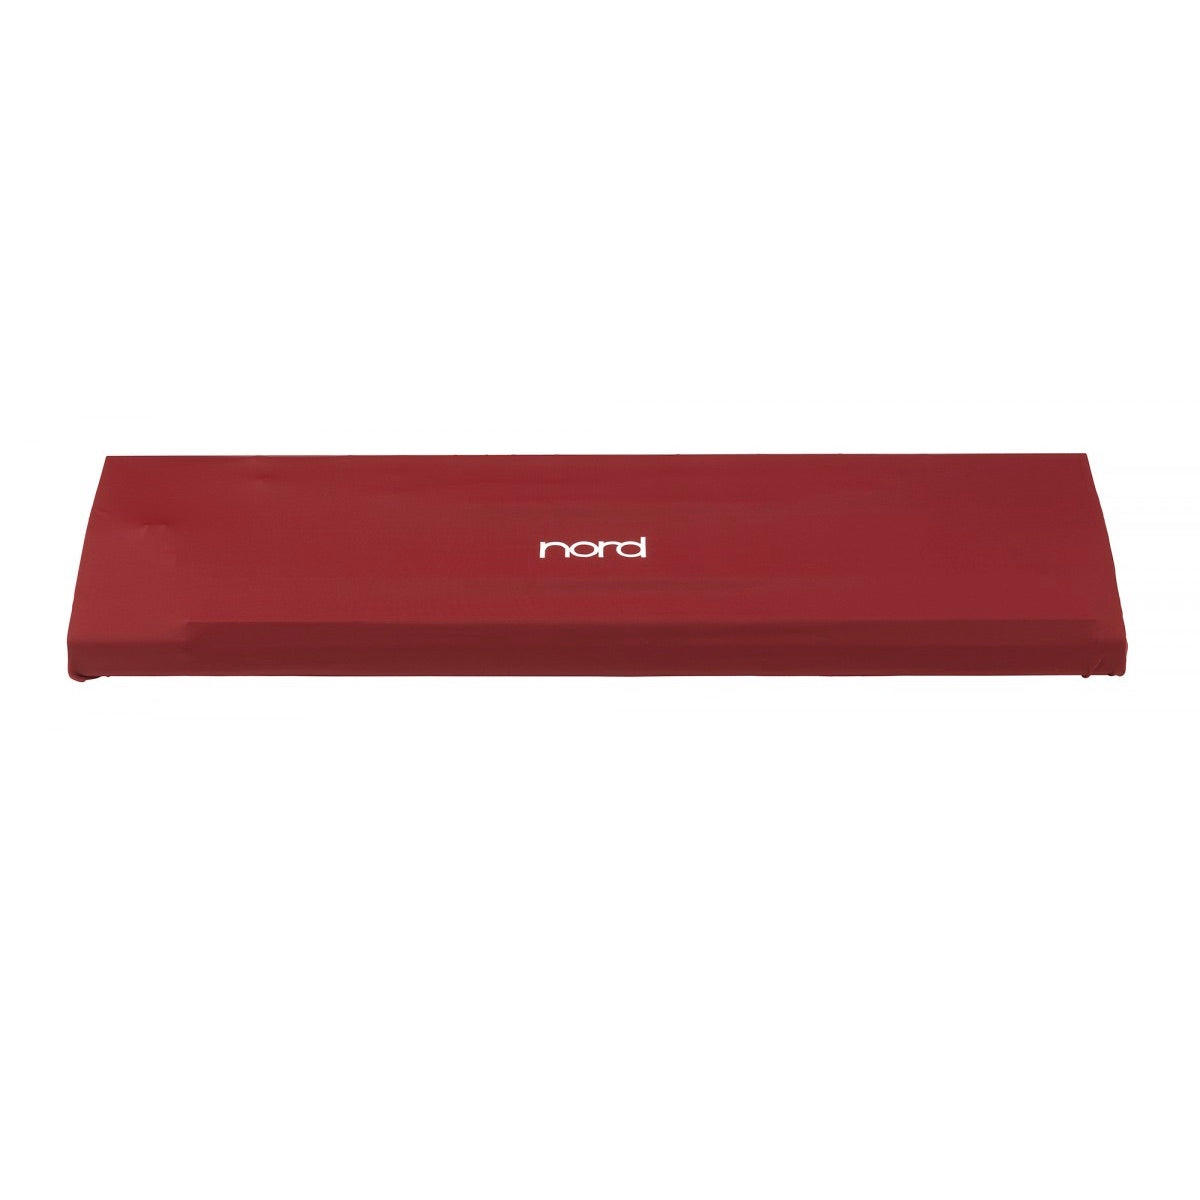 Nord Dust Cover - Red Nylon, Available in Four Sizes